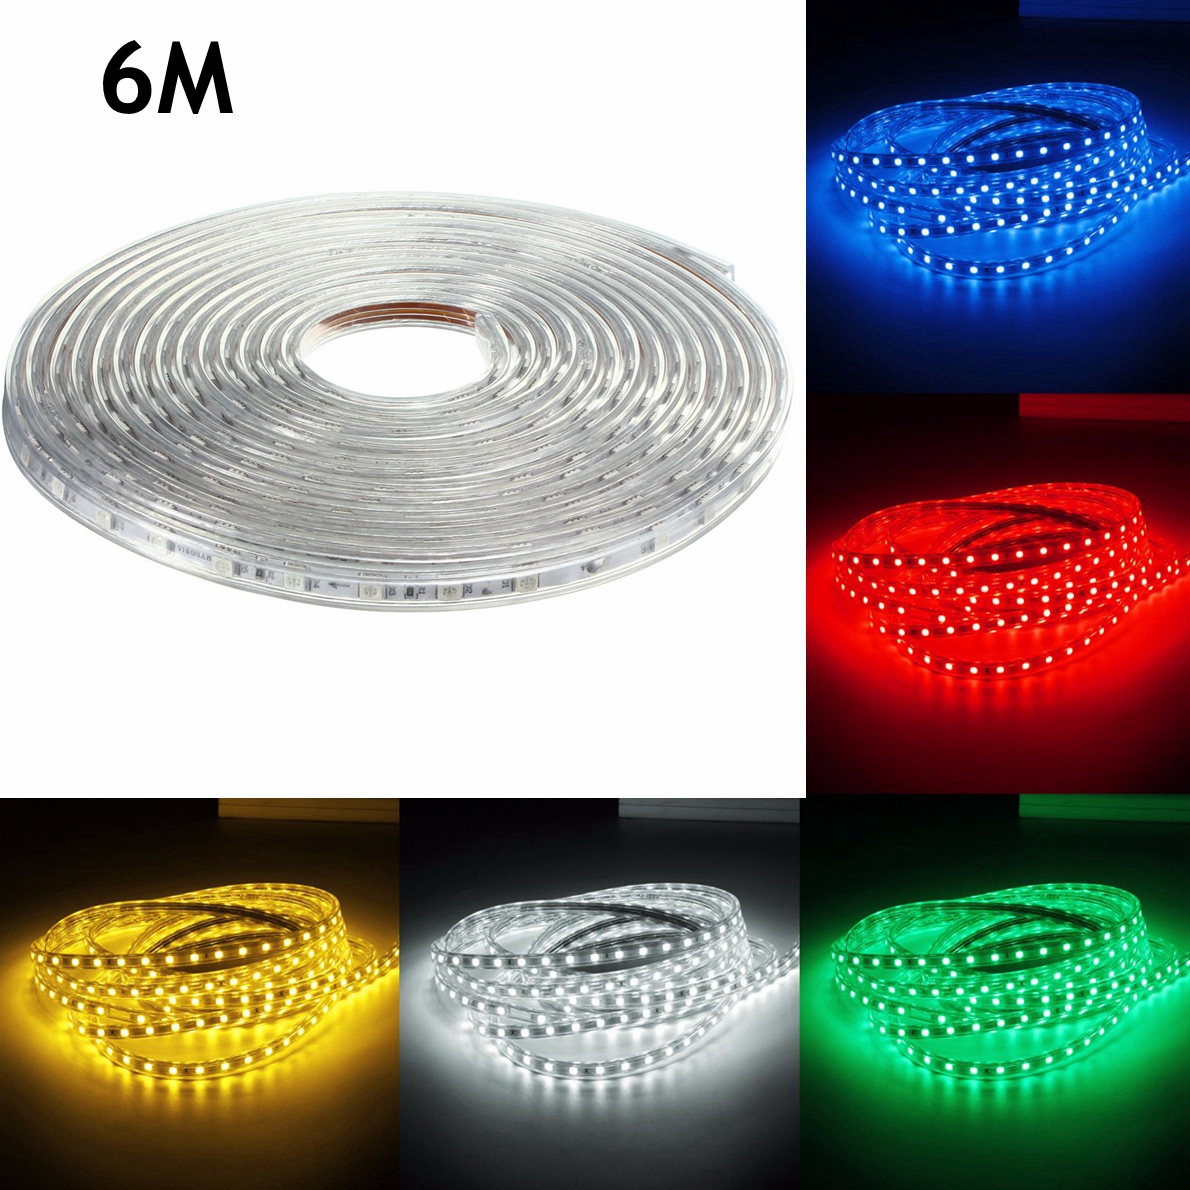 6M-5050-LED-SMD-Outdoor-Waterproof-Flexible-Tape-Rope-Strip-Light-Xmas-220V-1066362-1